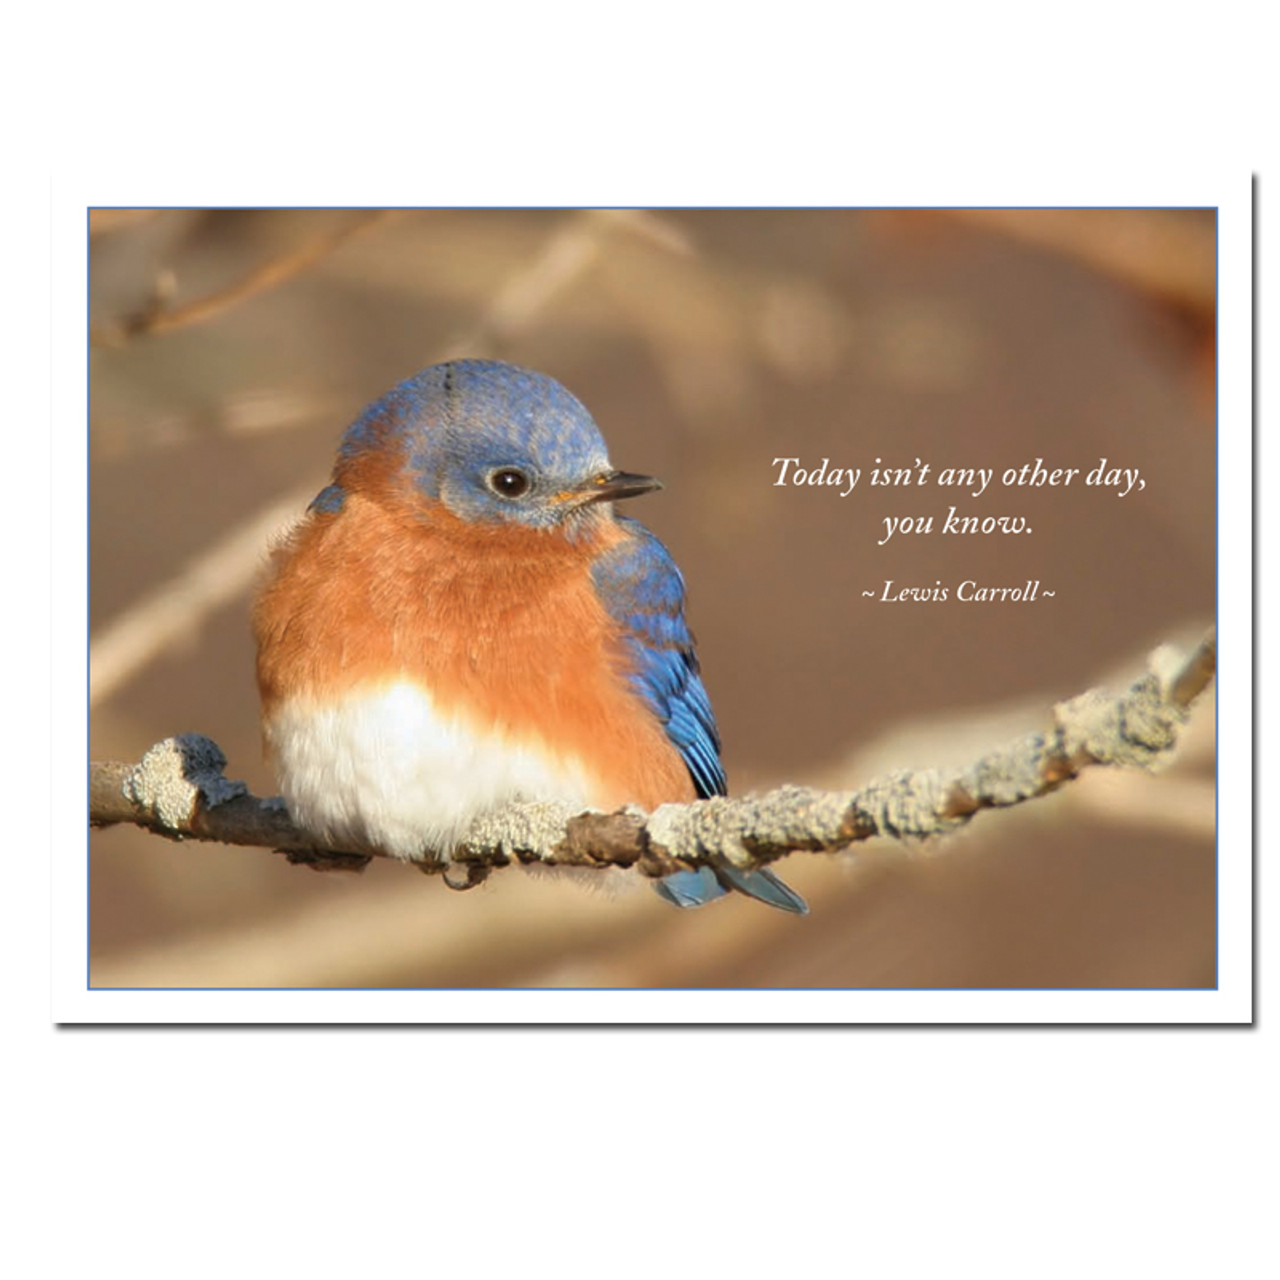 Bluebird Cards with Lewis Carroll Quotation cover Photo of bluebird with Lewis Carroll quotation: ”Today isn't any other day, you know”